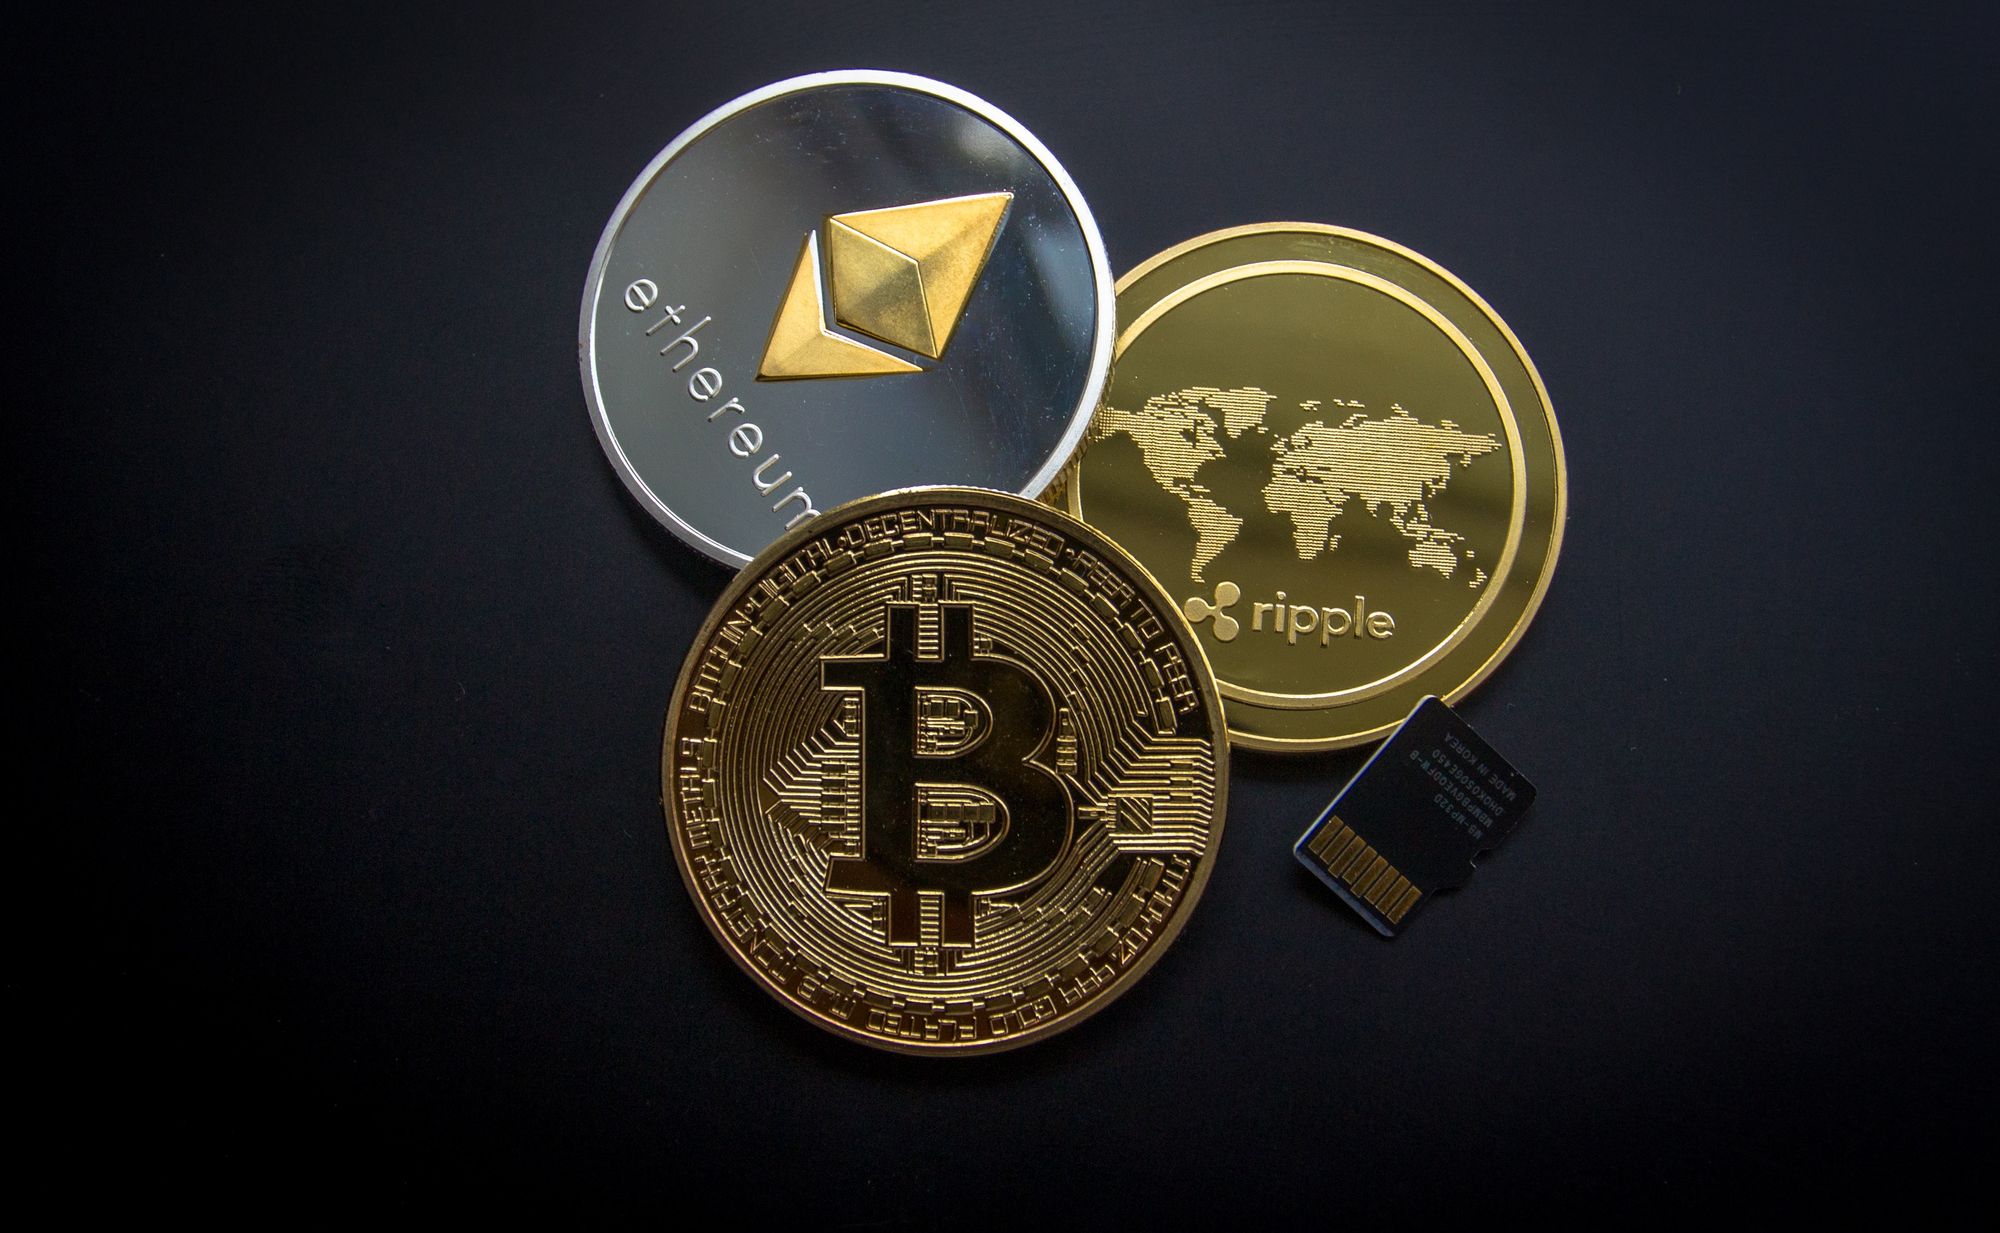 Ethereum, Bitcoin and Ripple